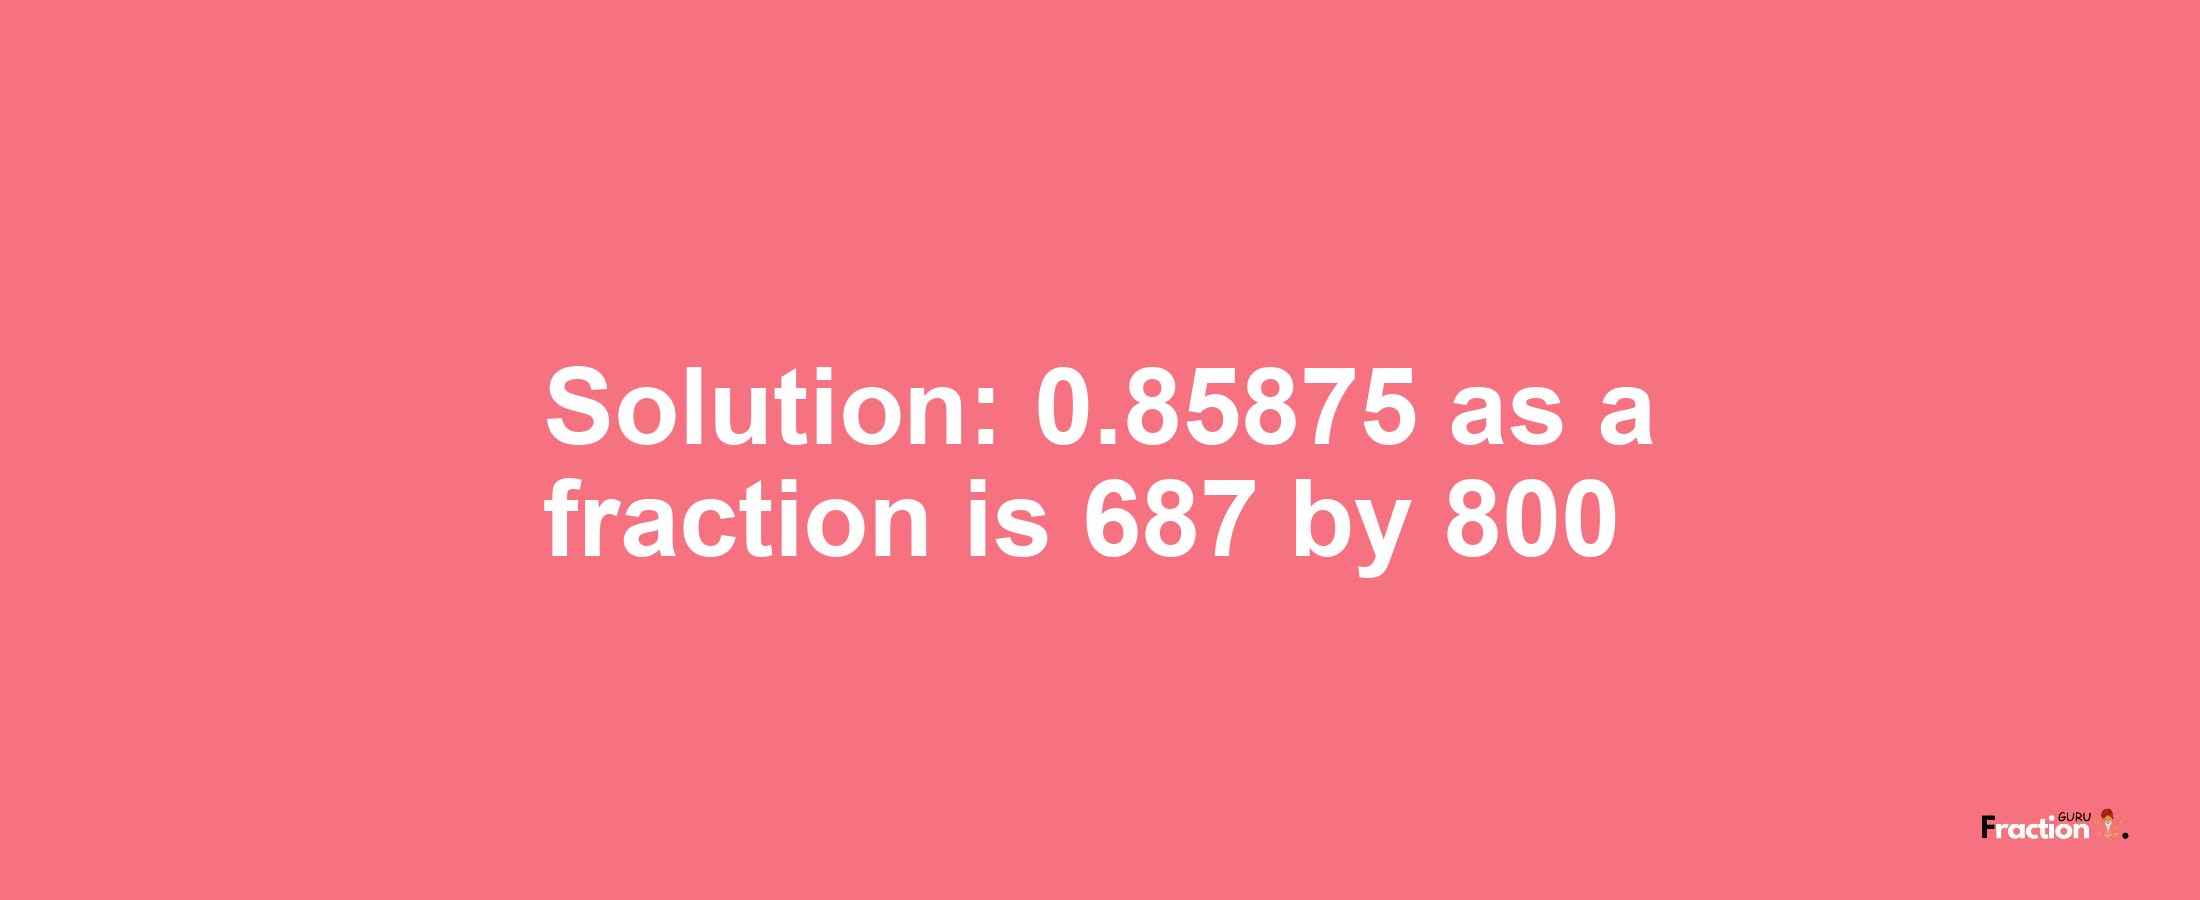 Solution:0.85875 as a fraction is 687/800